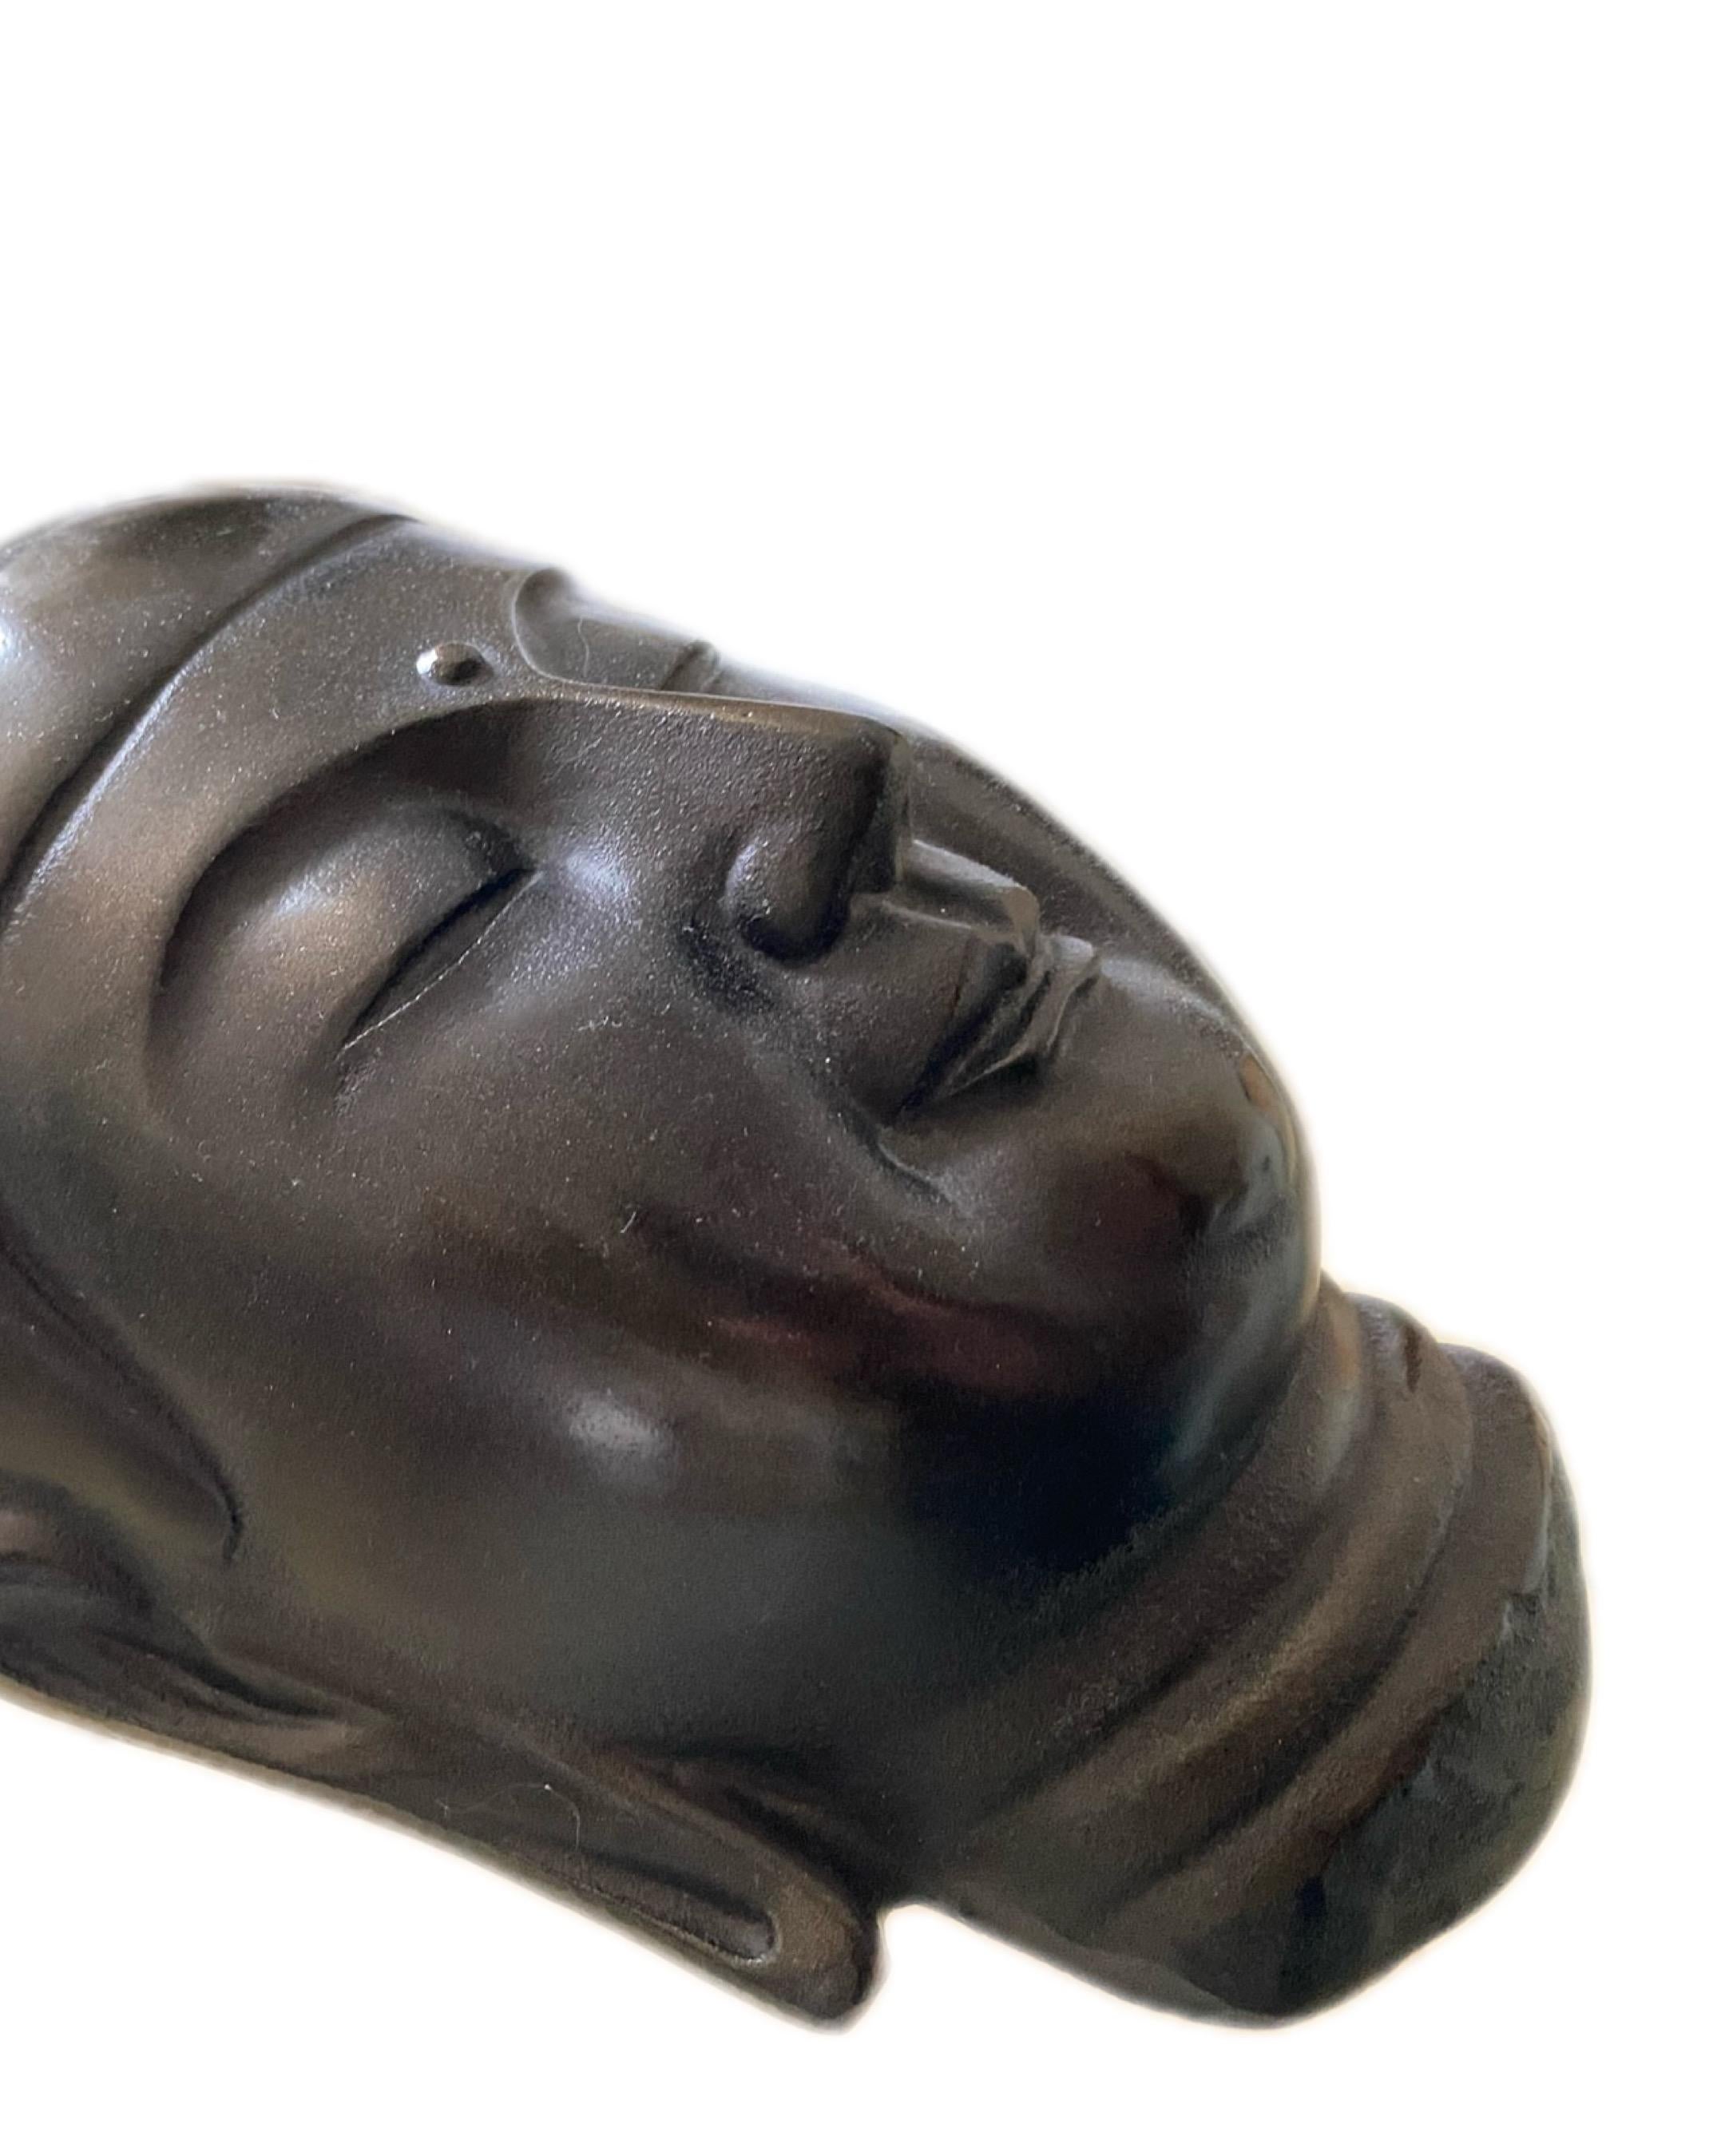 Japanese Buddha Bosatsu-Cast Iron sculpture mask-by Akaoka Copperware-GSY Select - Other Art Style Sculpture by Unknown